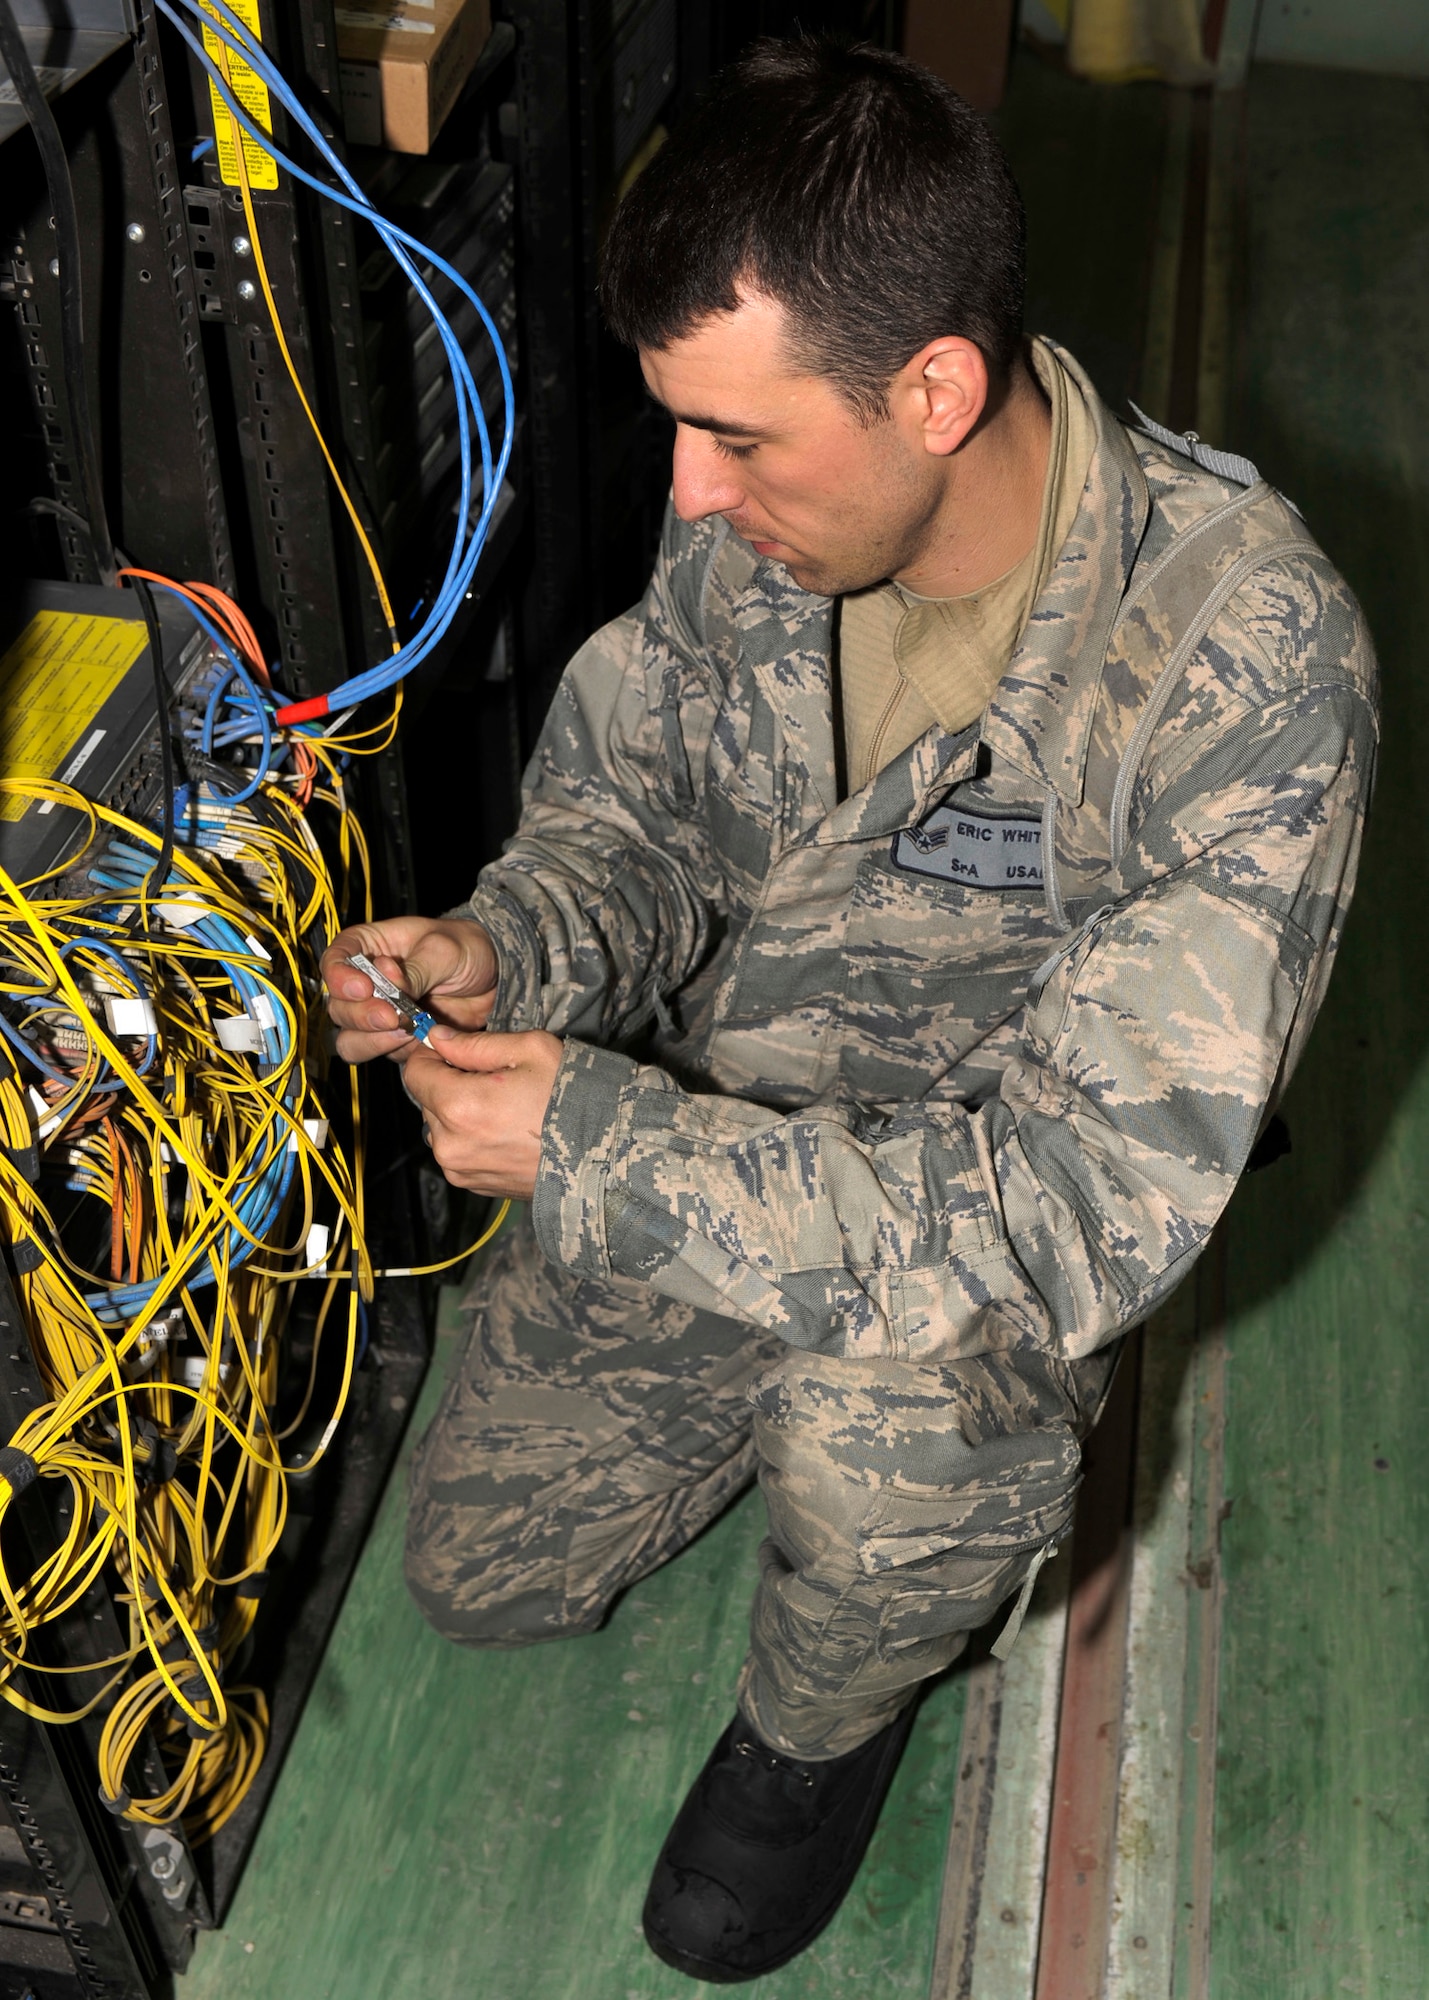 BAGRAM AIRFIELD, Afghanistan—Senior Airman Eric White fixes a portion of the cables that control the non-classified internet protocol router network at Bagram Airfield, Afghanistan, Jan. 23, 2012. White is a network technician 455th Expeditionary Communications Squadron and is deployed from Joint Base Langley-Eustis, VA. (U.S. Air Force photo/ Airman 1st Class Ericka Engblom)